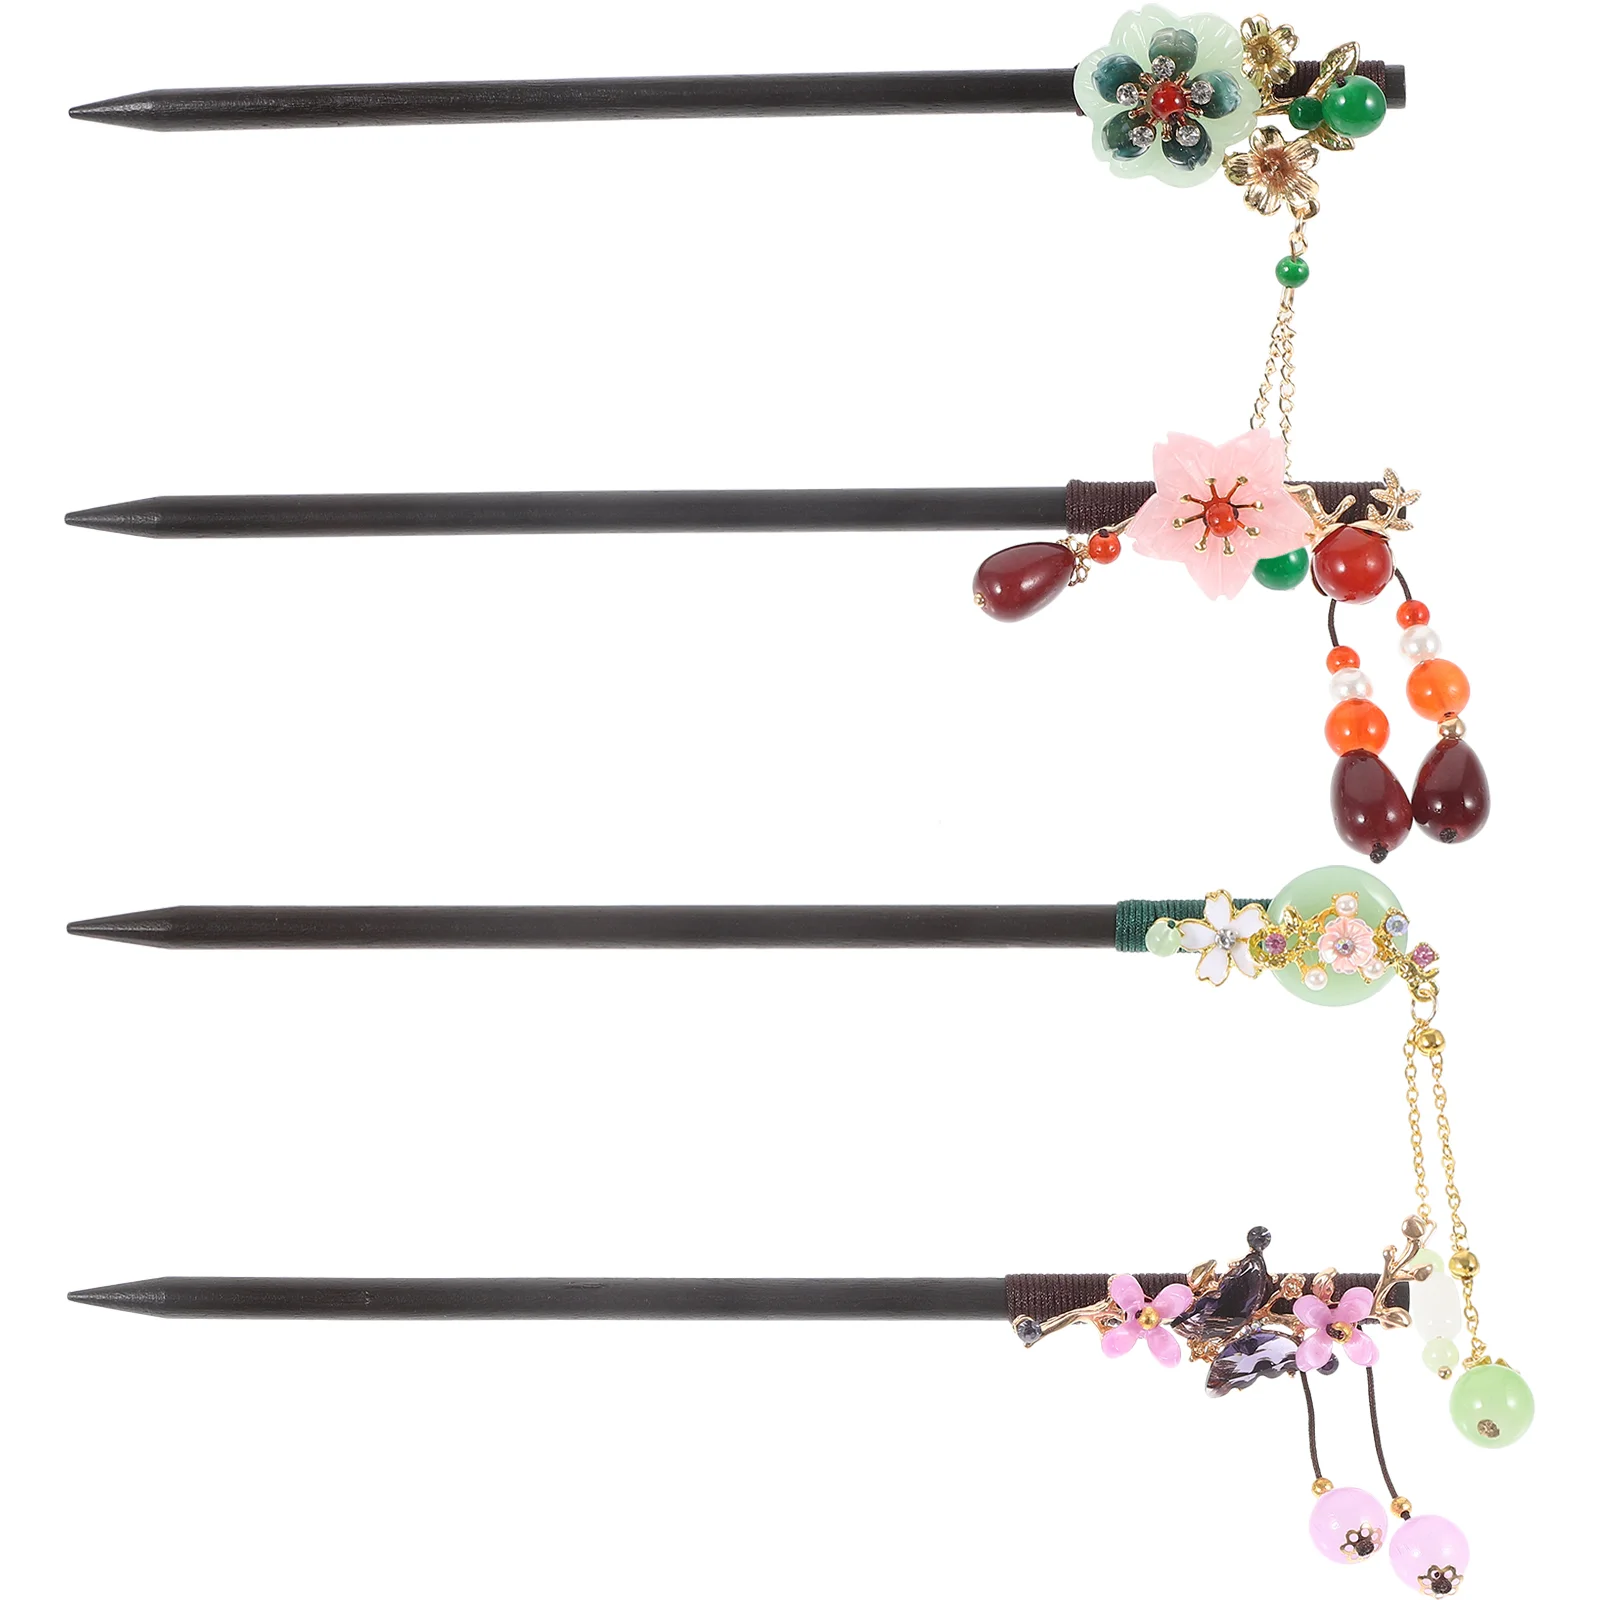 4pcs Wooden Hairpins Style Headdress Hairpin Hair Jewelry